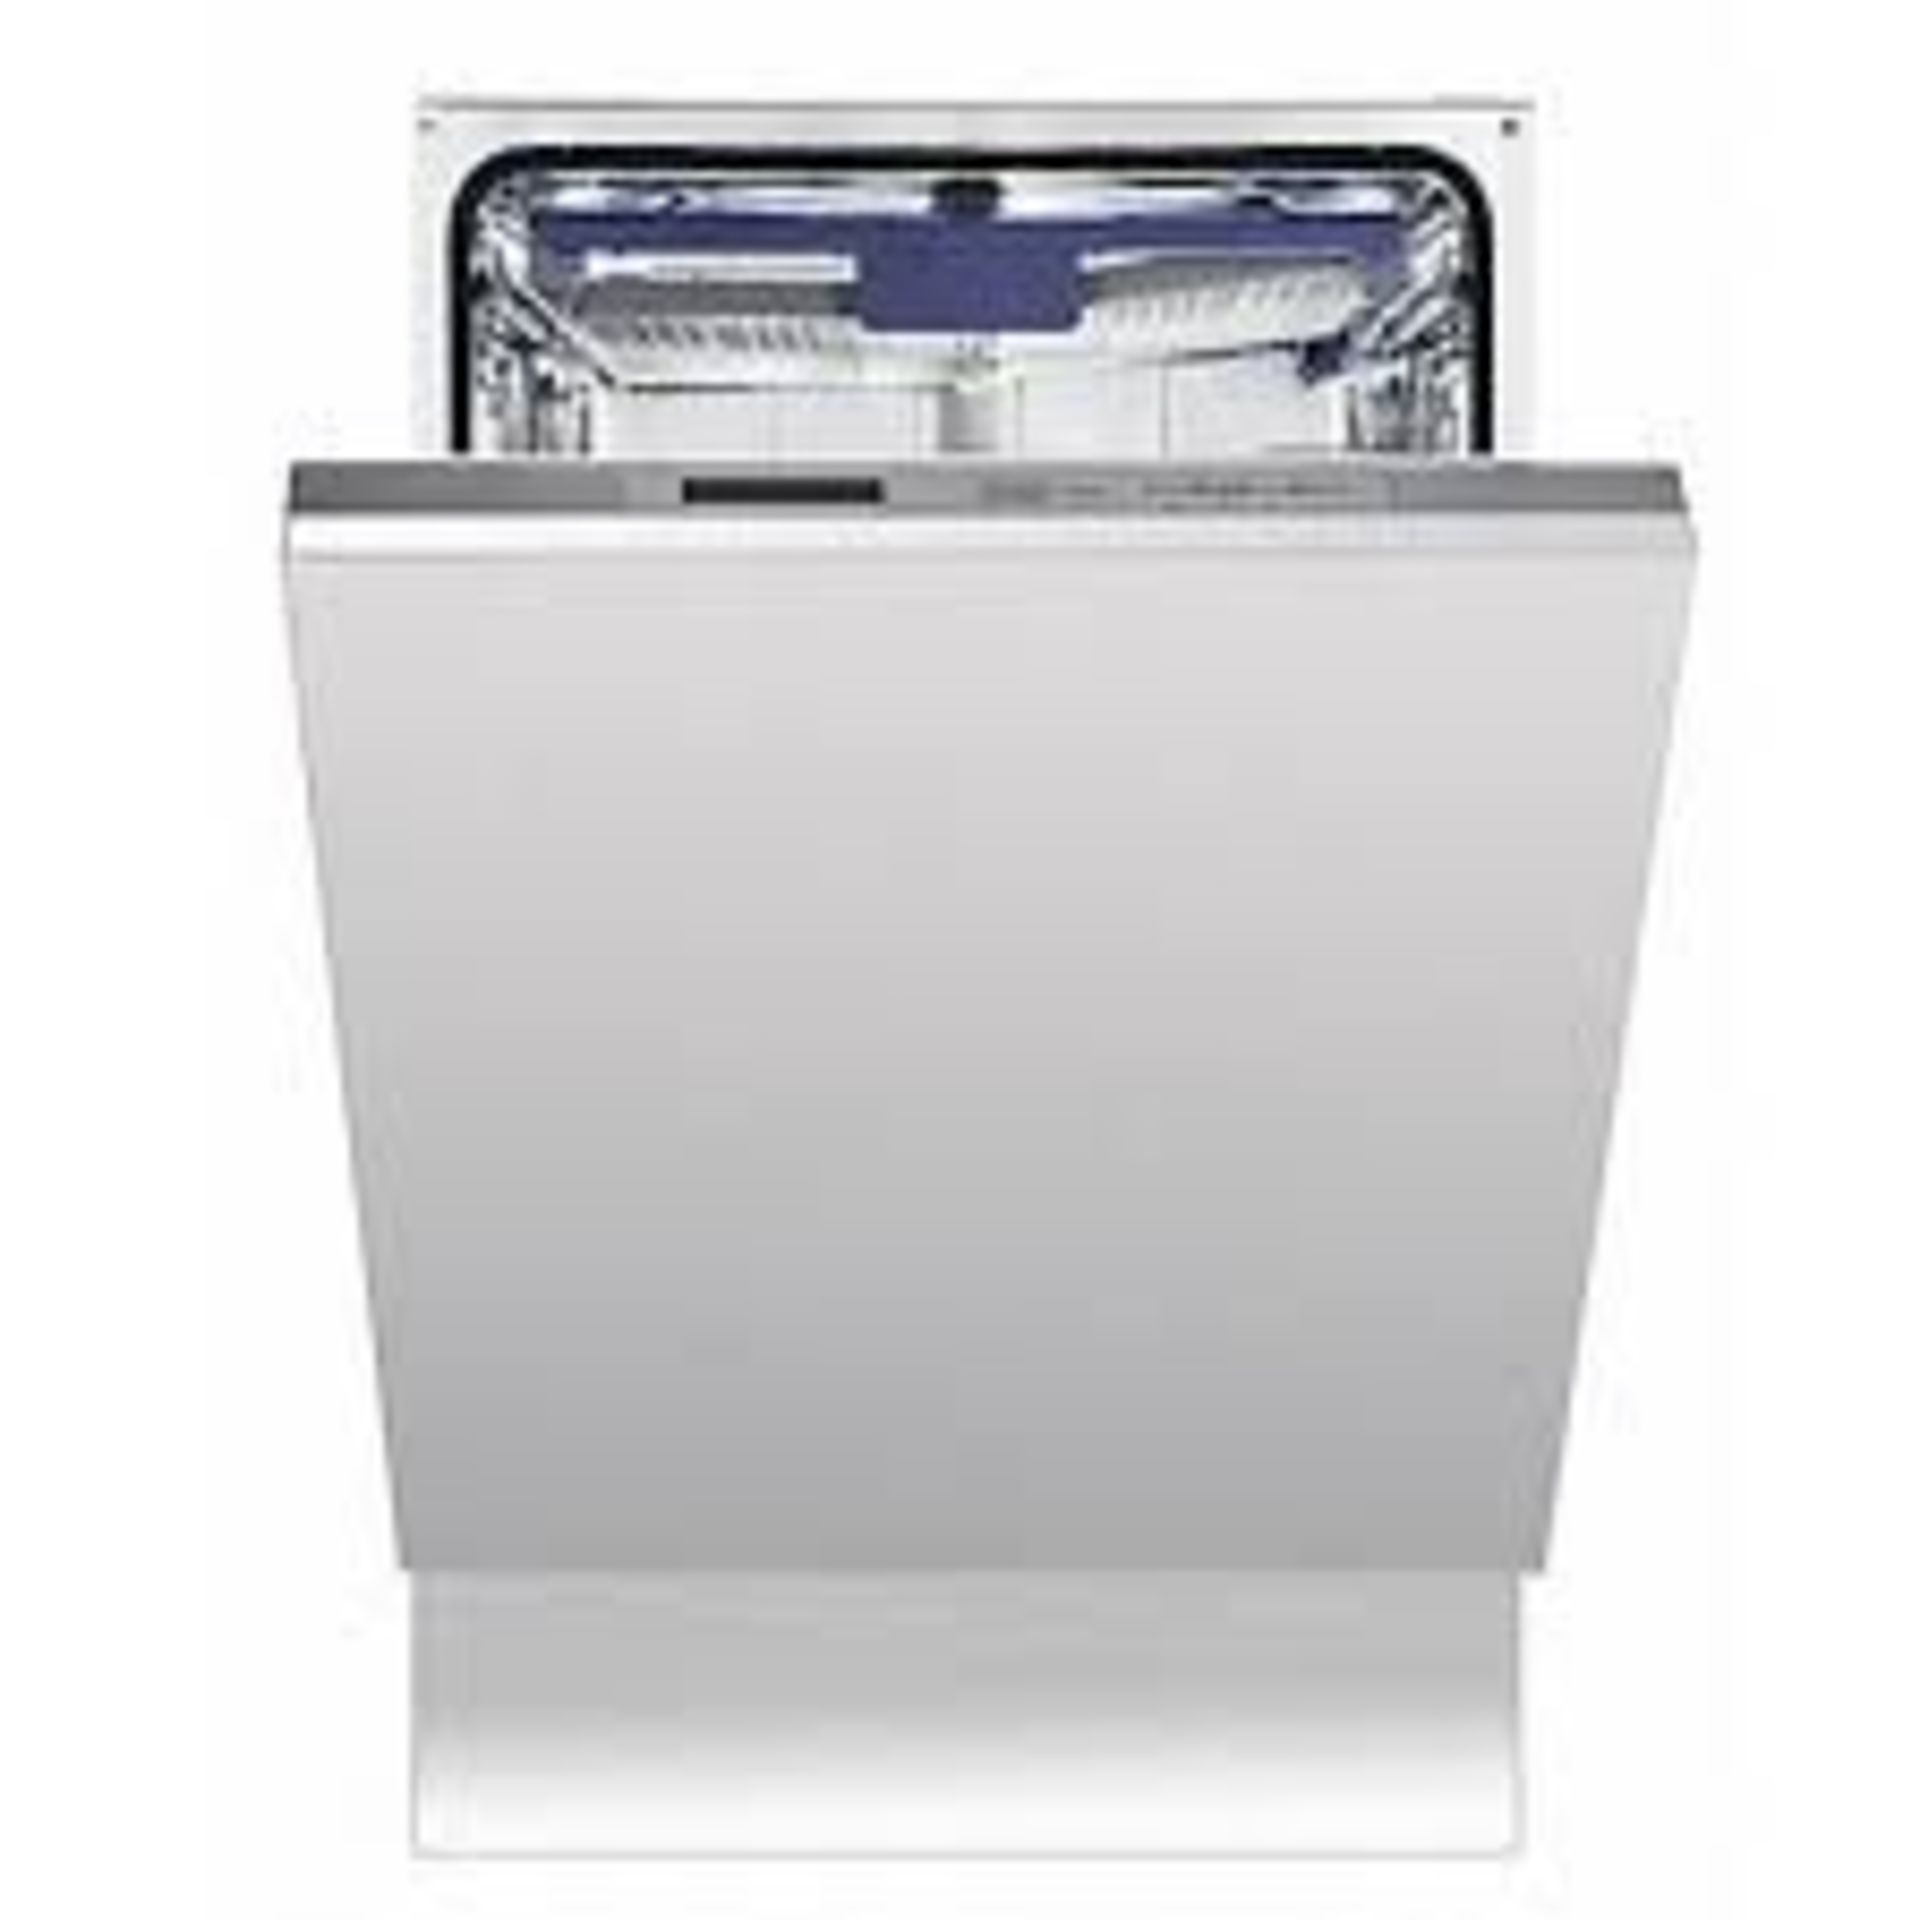 Cooke & Lewis Integrated Full size Dishwasher - White - S2. RRP £399.00